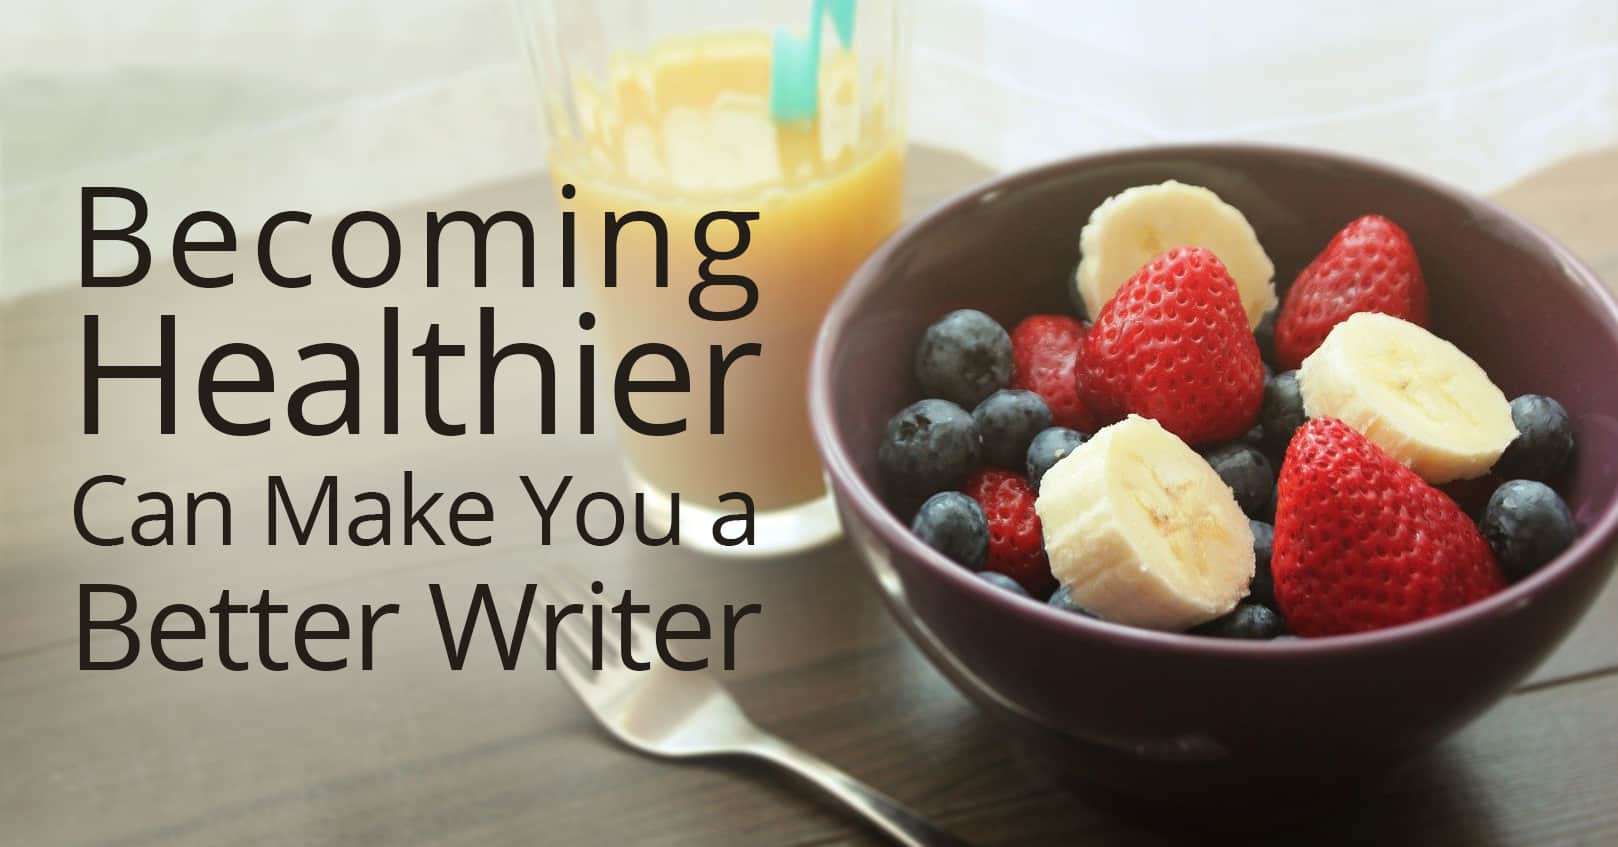 becoming healthier makes you a better writer